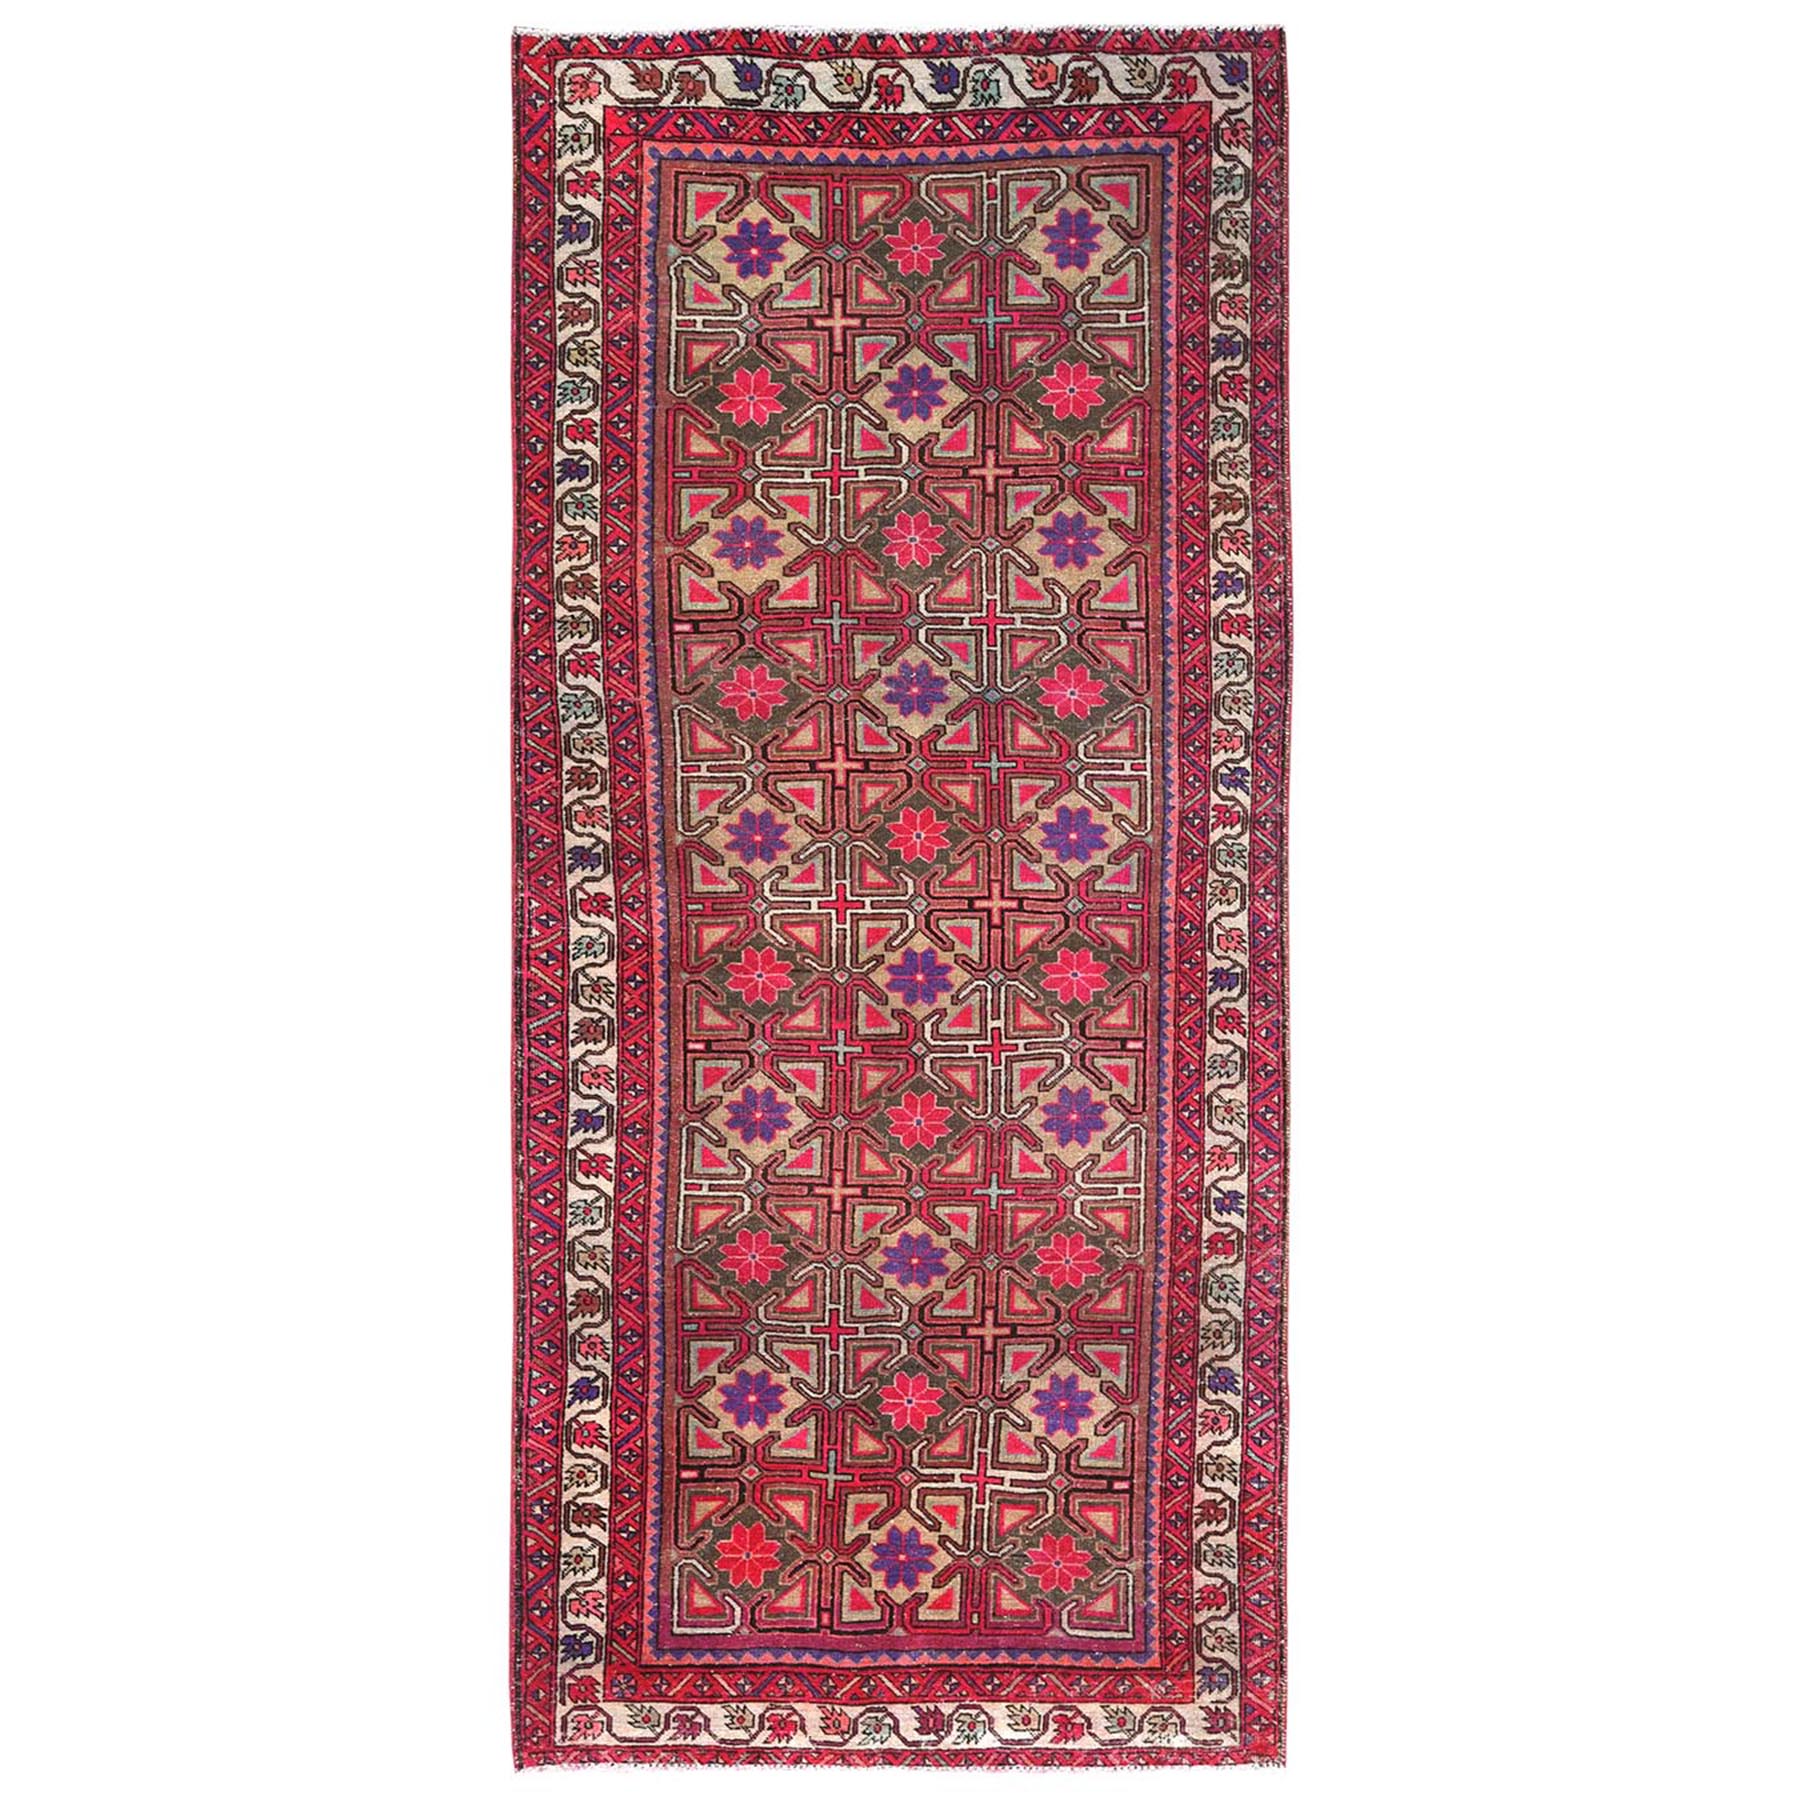  Wool Hand-Knotted Area Rug 4'8